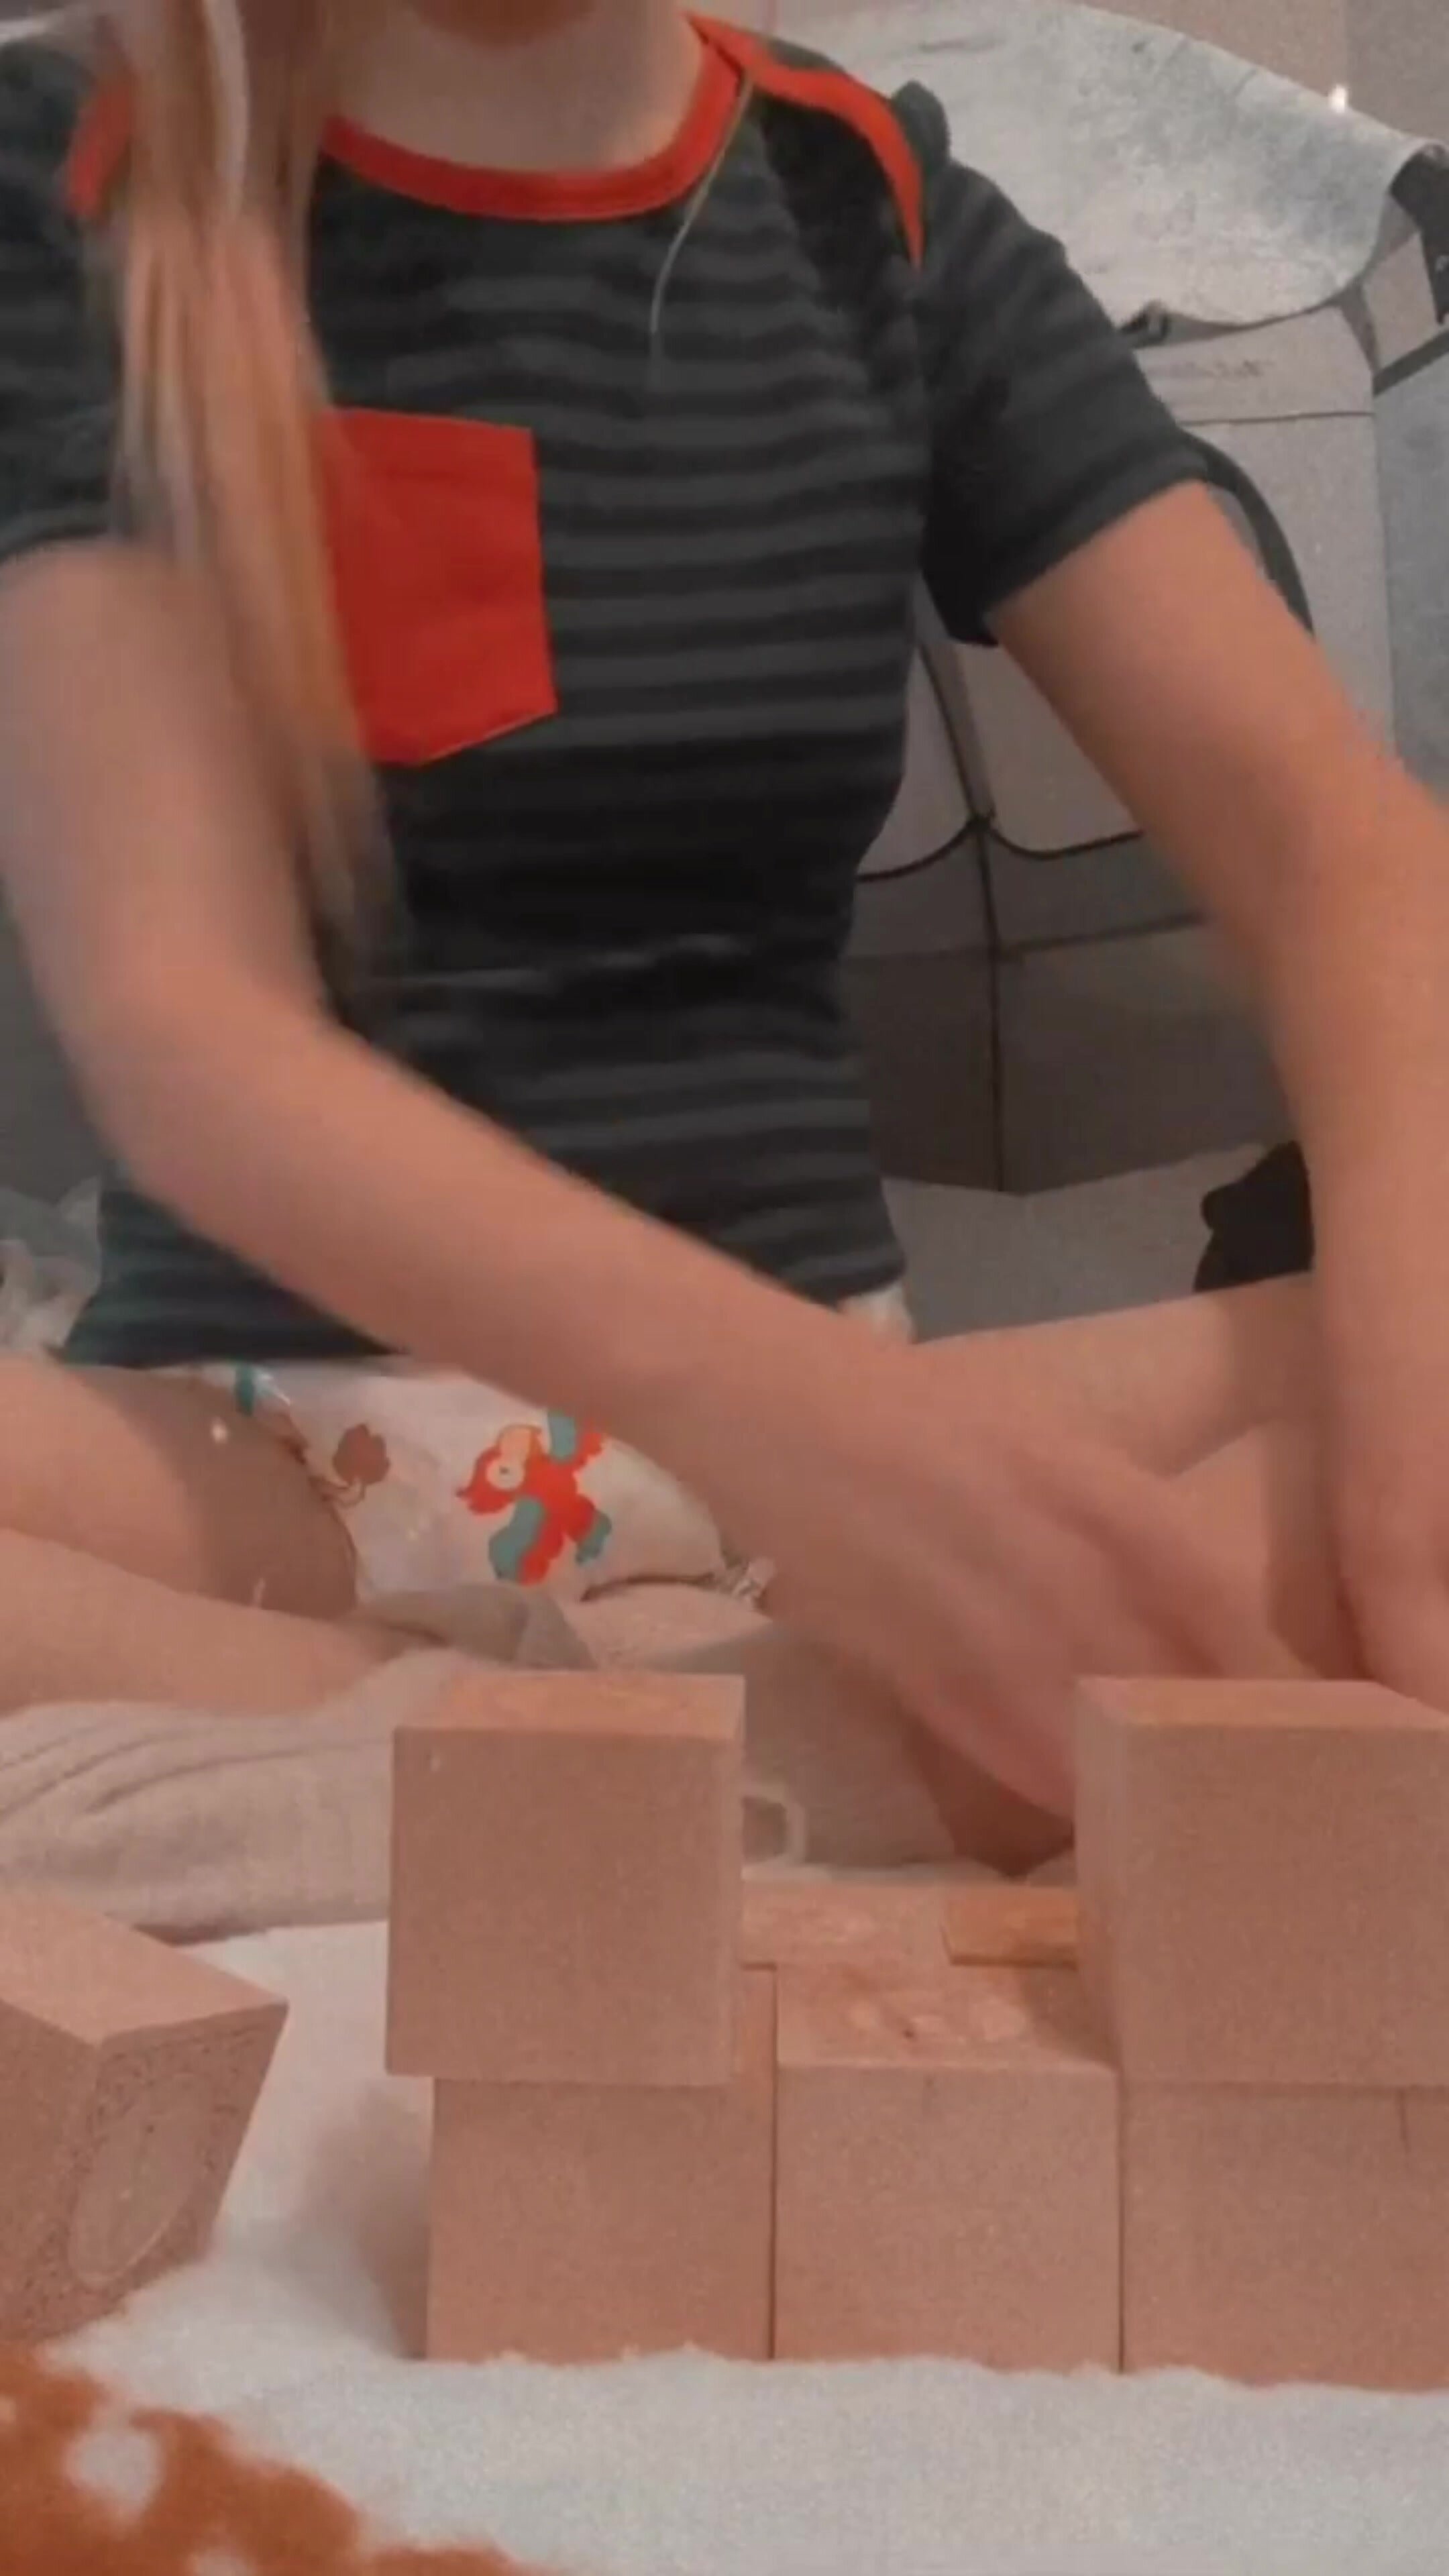 Girl Diapered While Playing With Blocks